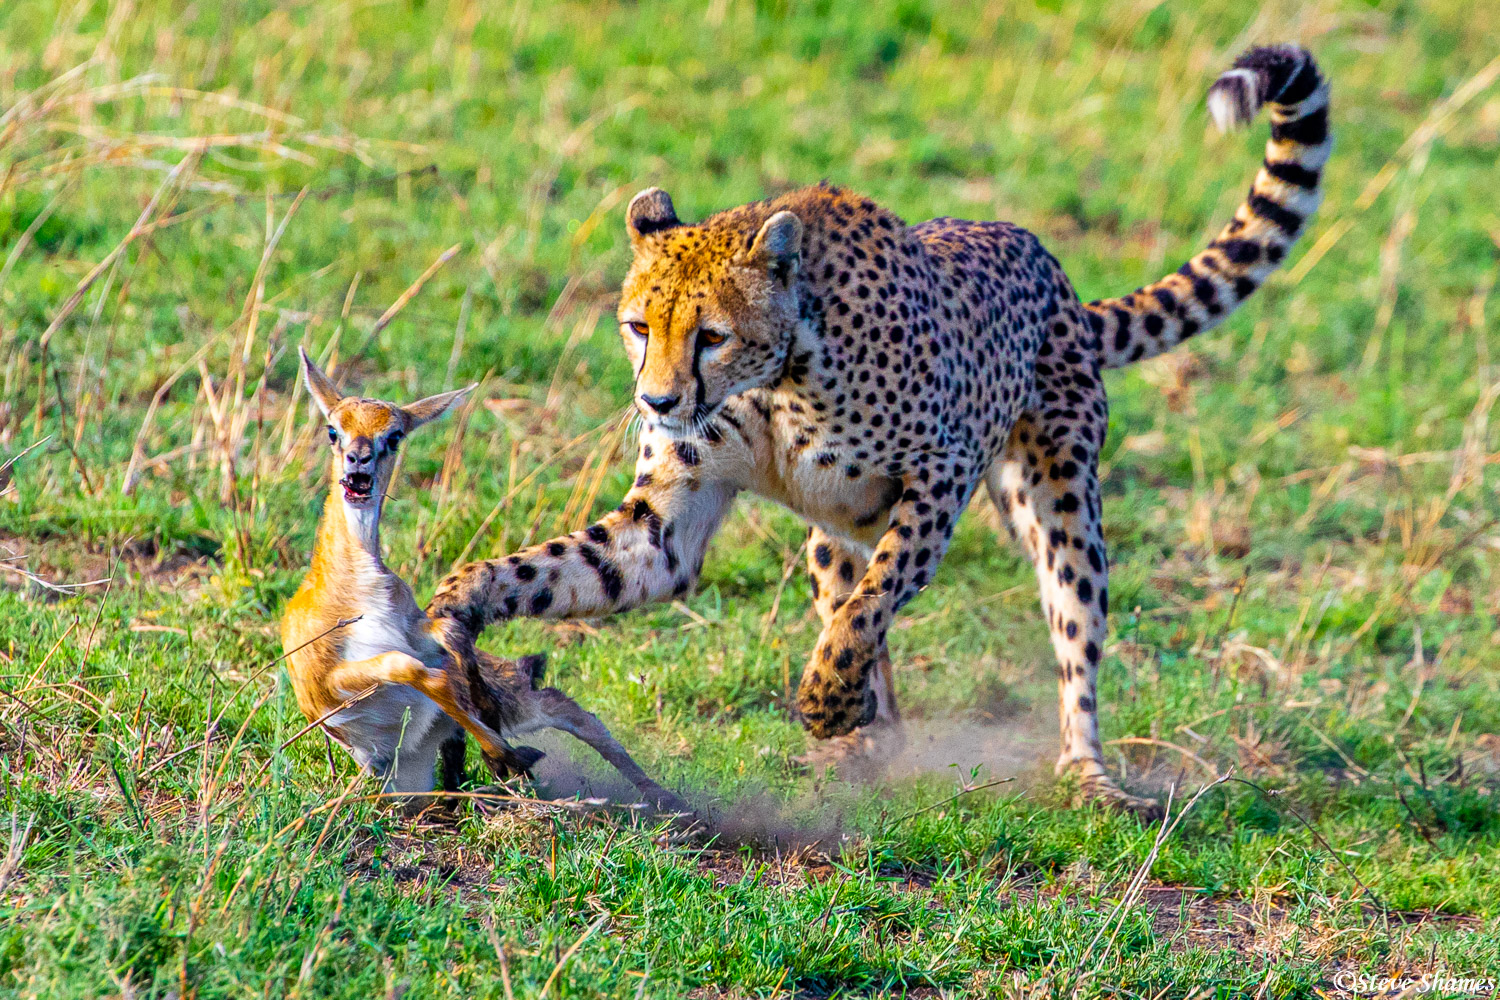 This mother caught a young gazelle, but did not kill it, and is now batting it around and will present it to her cub.